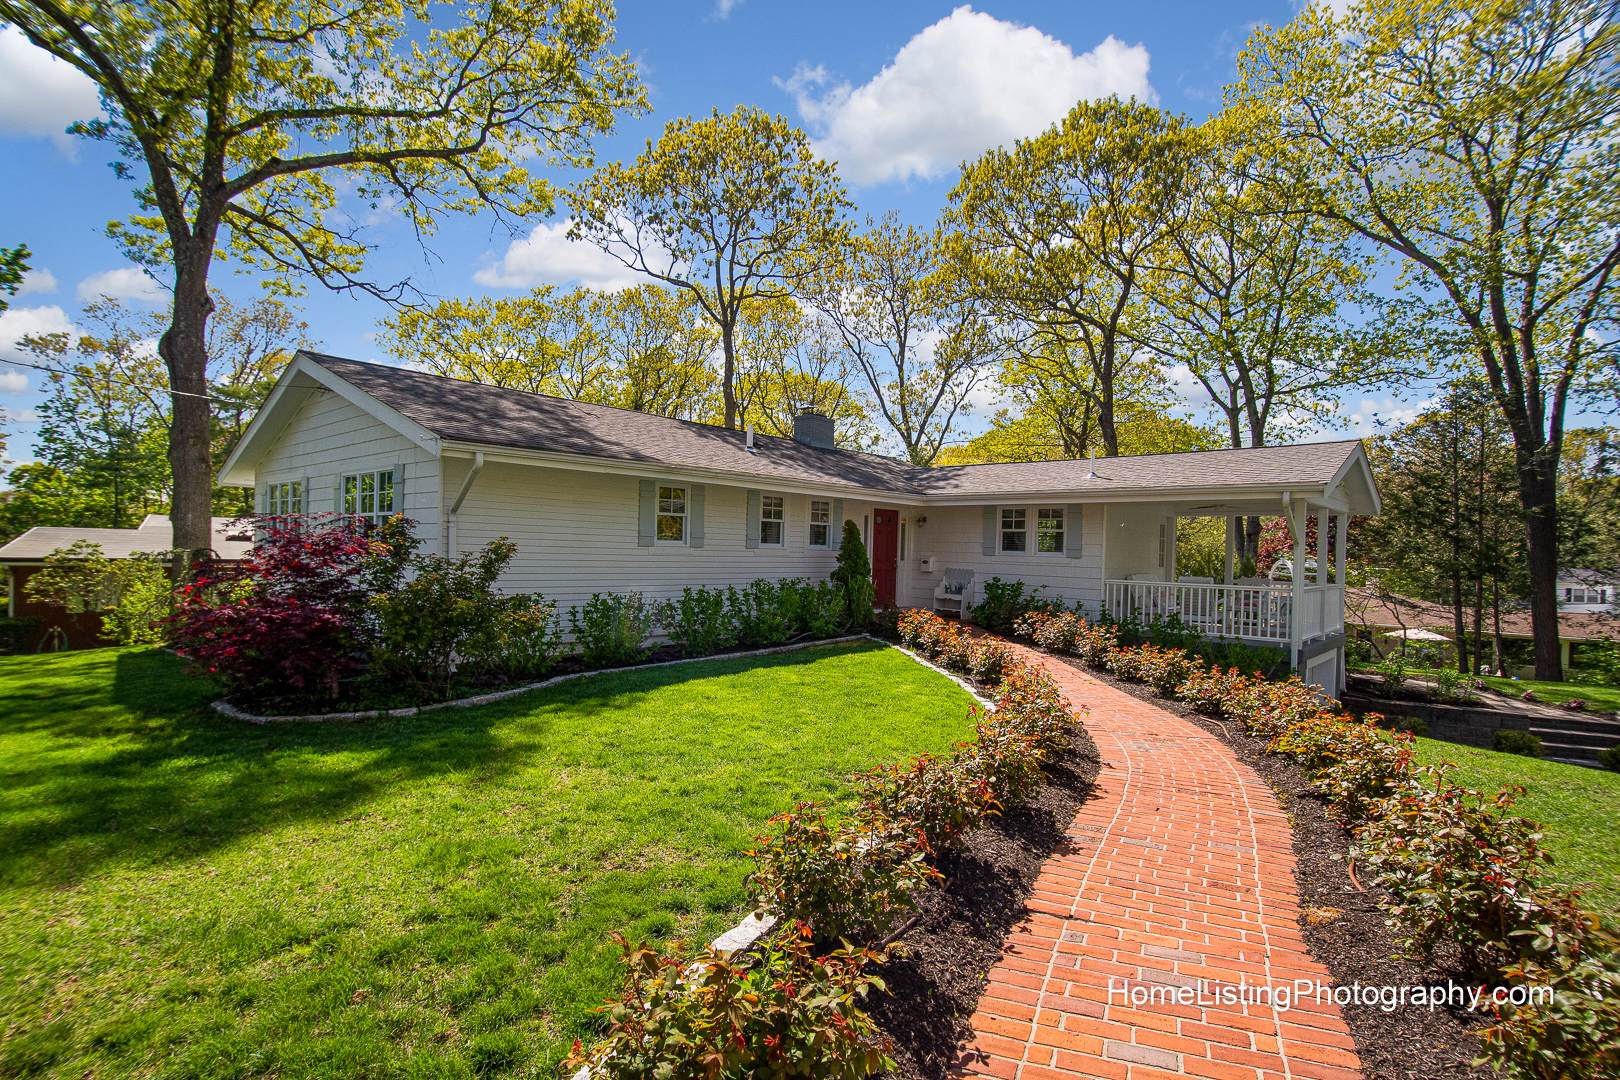 Thomas Adach - Norwood MA professional real estate photographer - 508-655-2225 Home Listing Photography